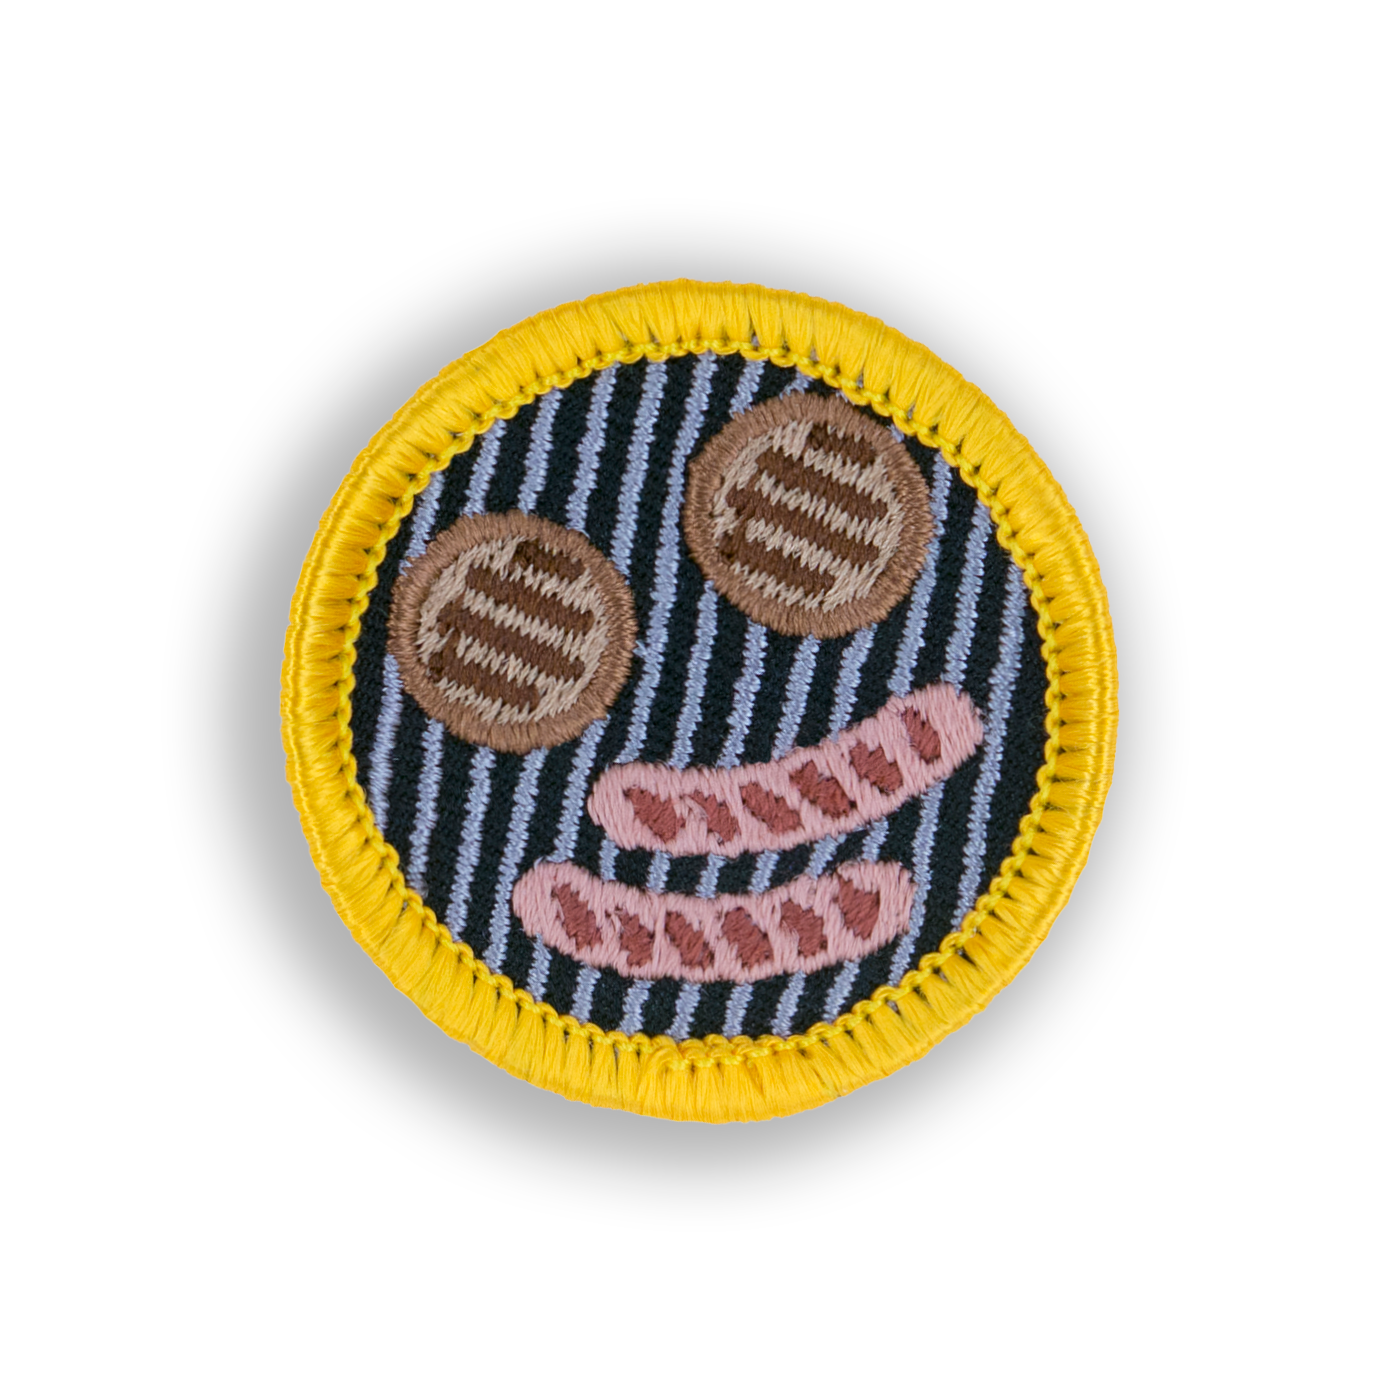 King of the Grill Patch | Demerit Wear - Fake Merit Badges